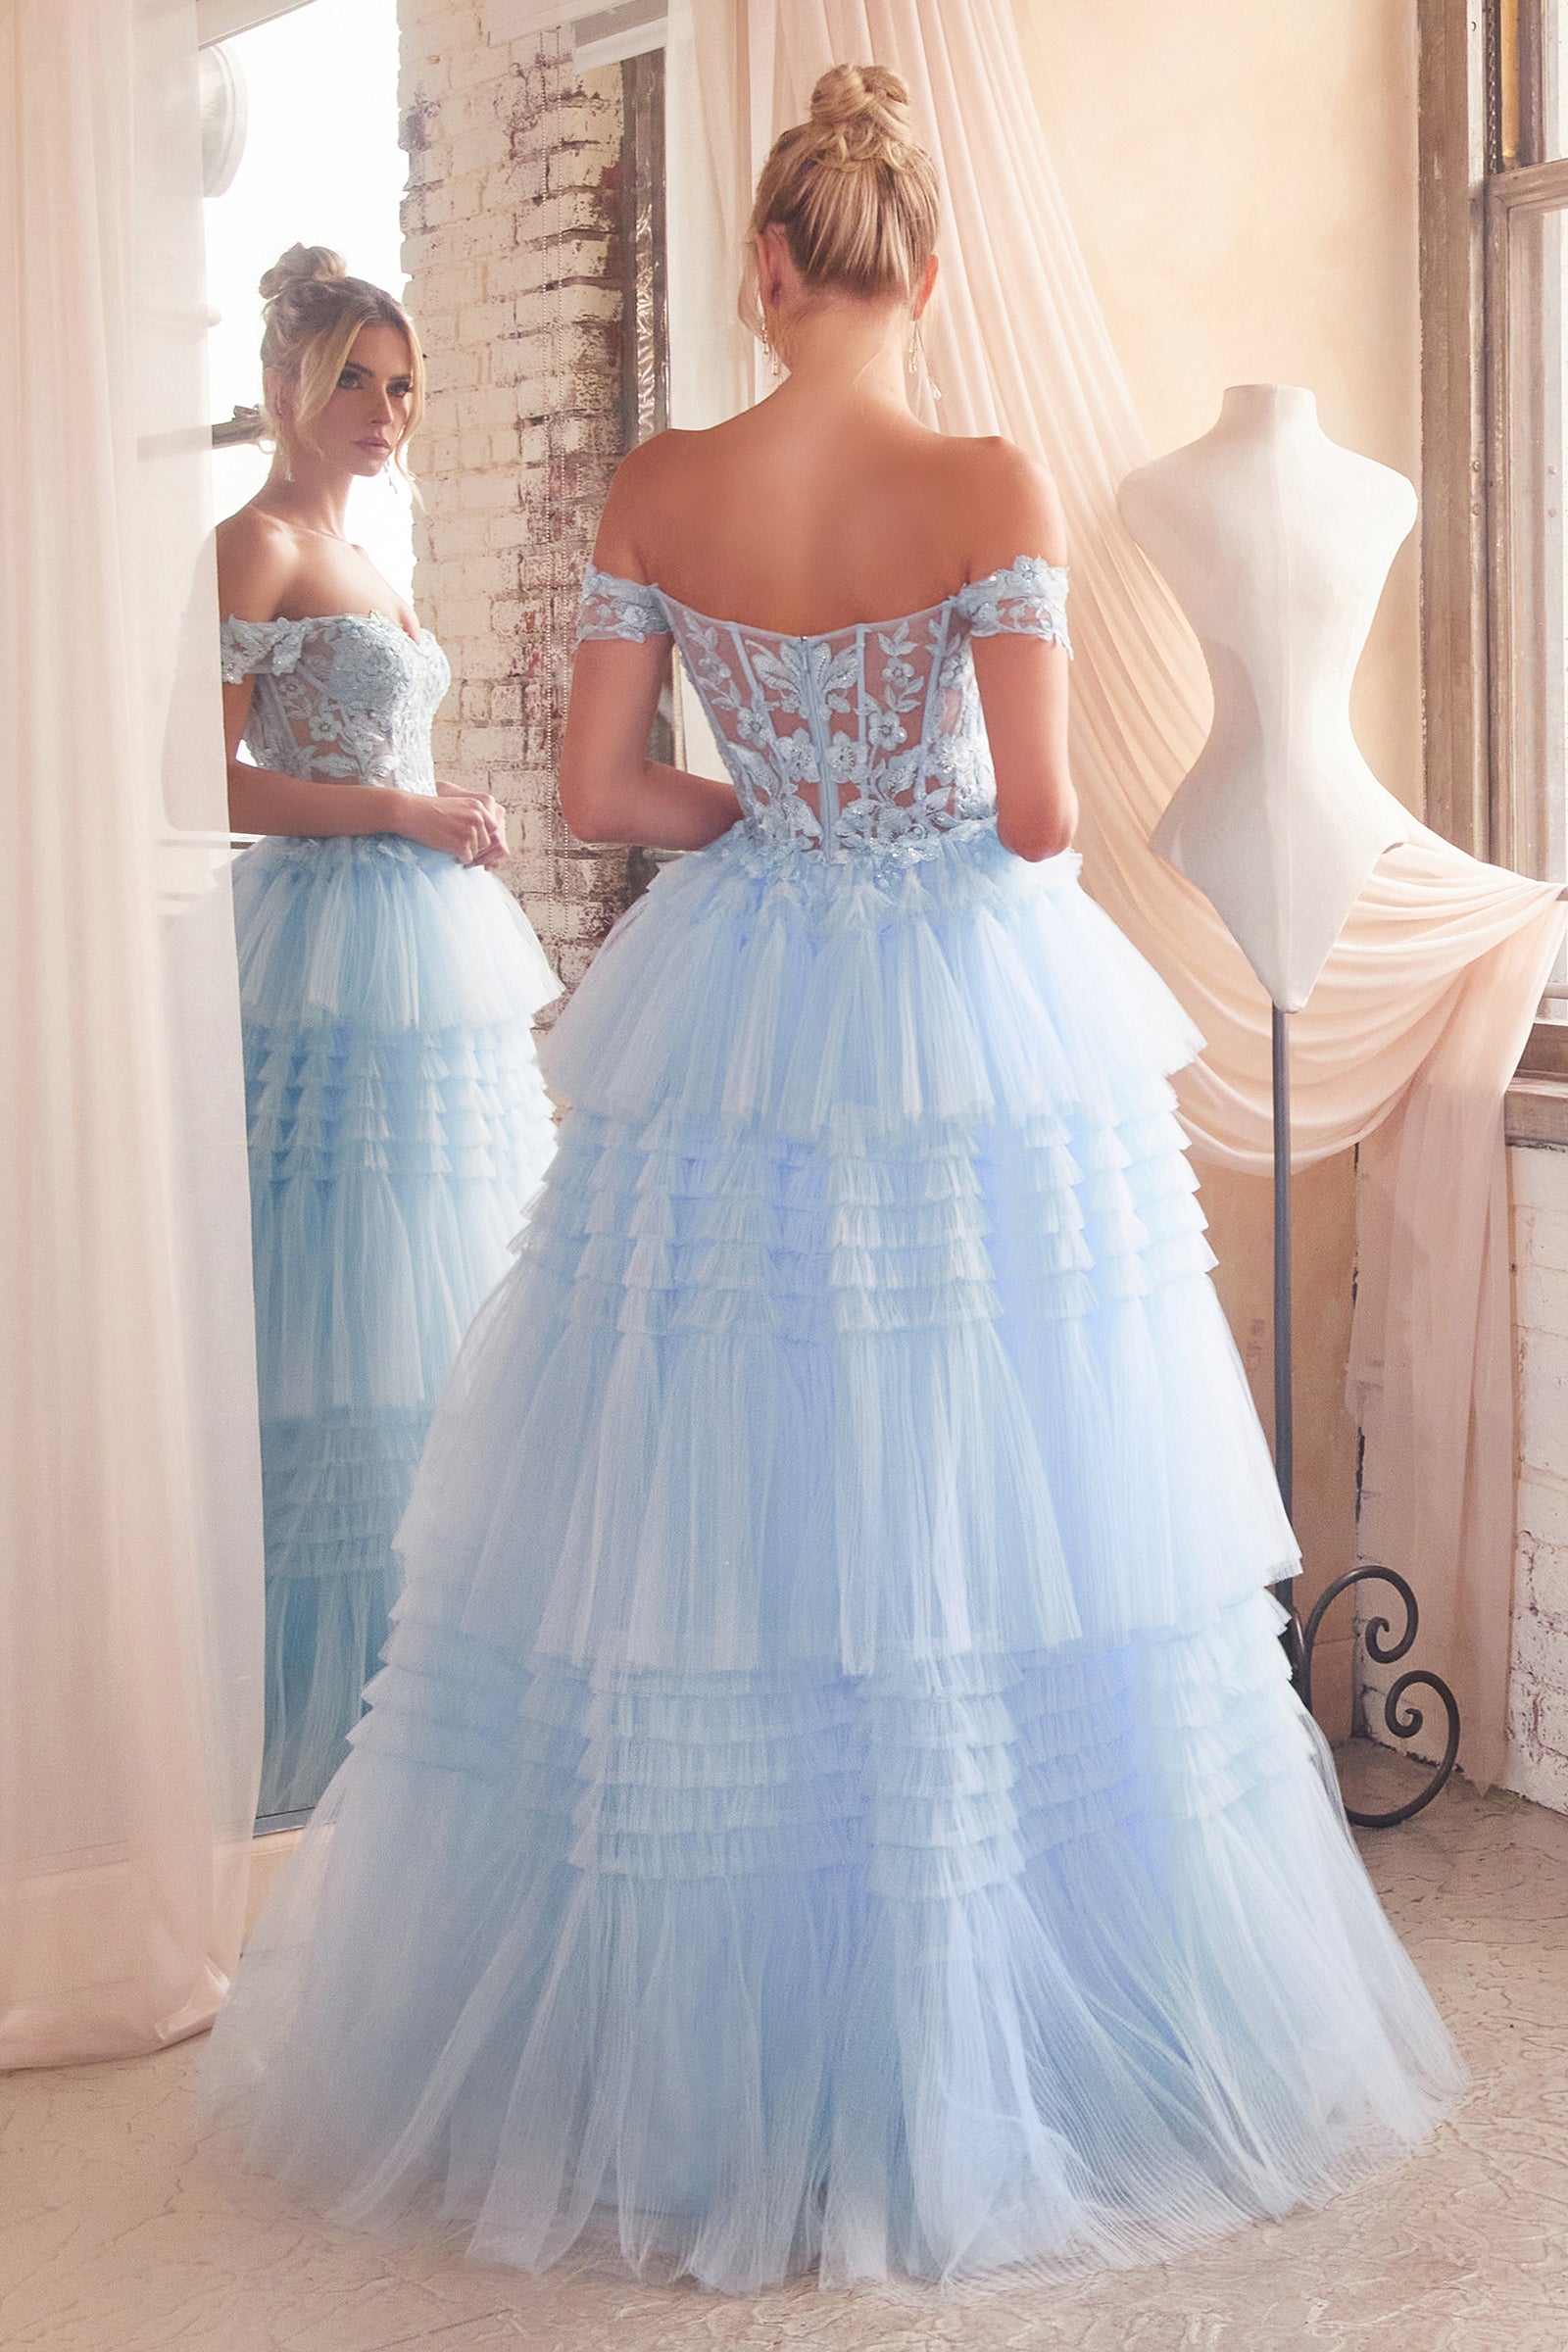 LISTARI Tulle Waterfall Off Shoulder Ball Gown Prom & Formal Dress